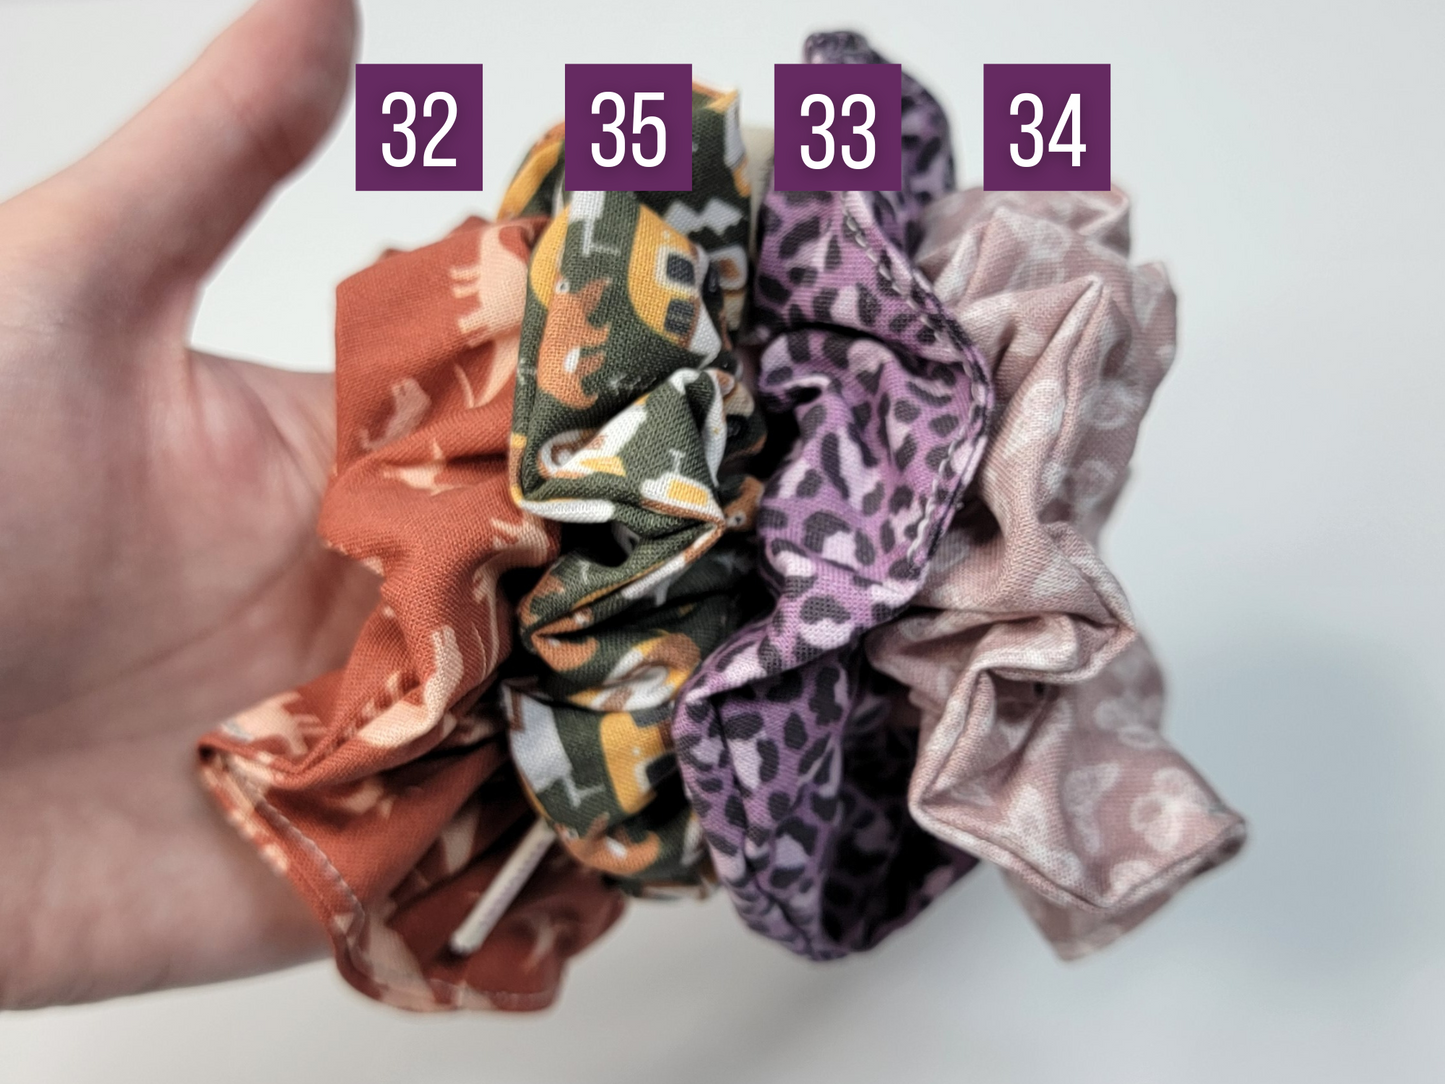 Comparison of prints. 32 is orange with dinosaurs, 35 is dark green with camping motifs, 33 is a violet leopard print, 34 is a mauve pink with white butterflies.